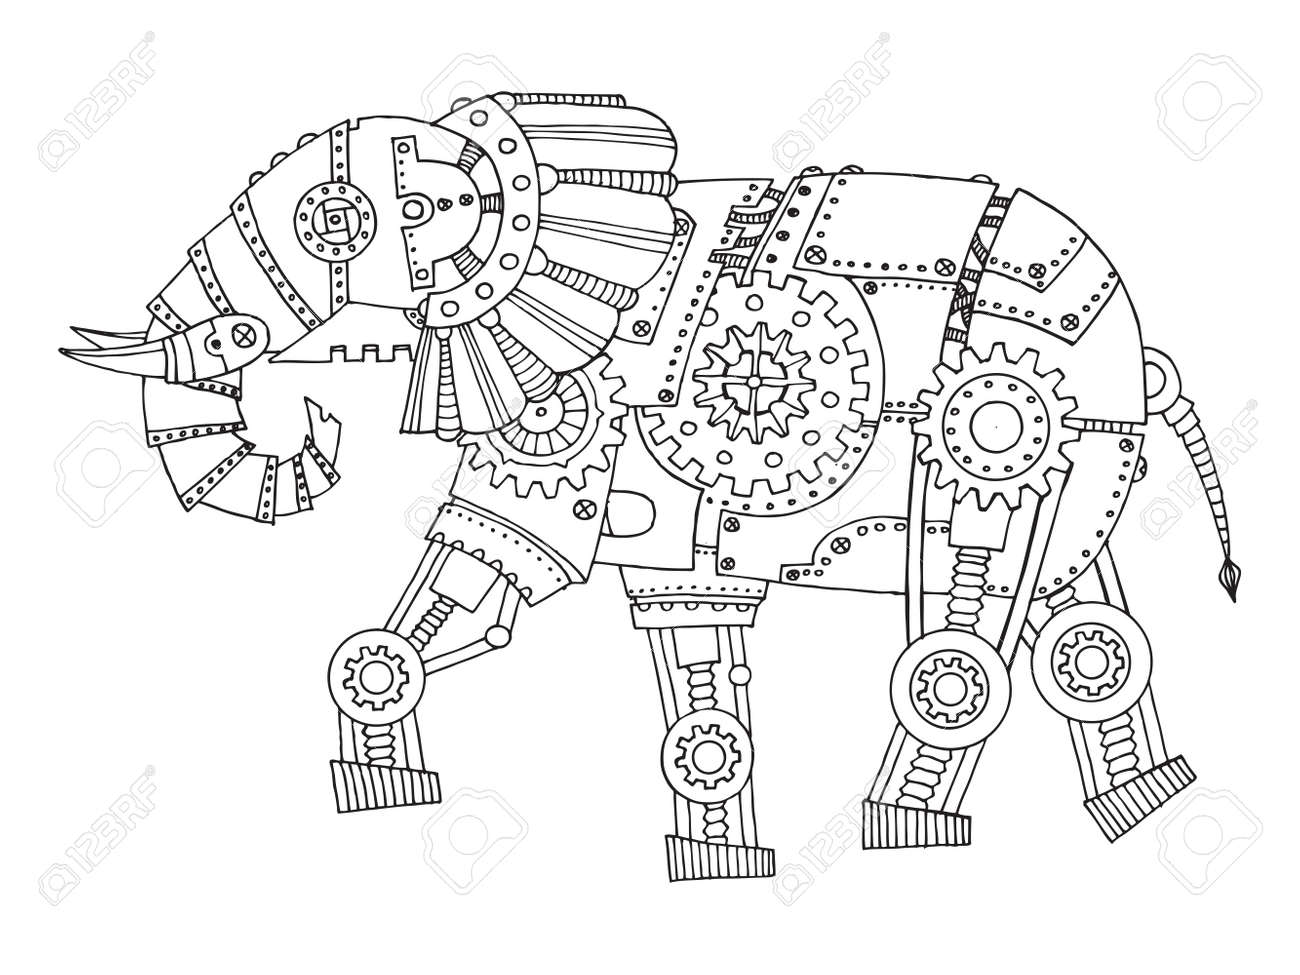 Steam punk style elephant coloring book vector royalty free svg cliparts vectors and stock illustration image